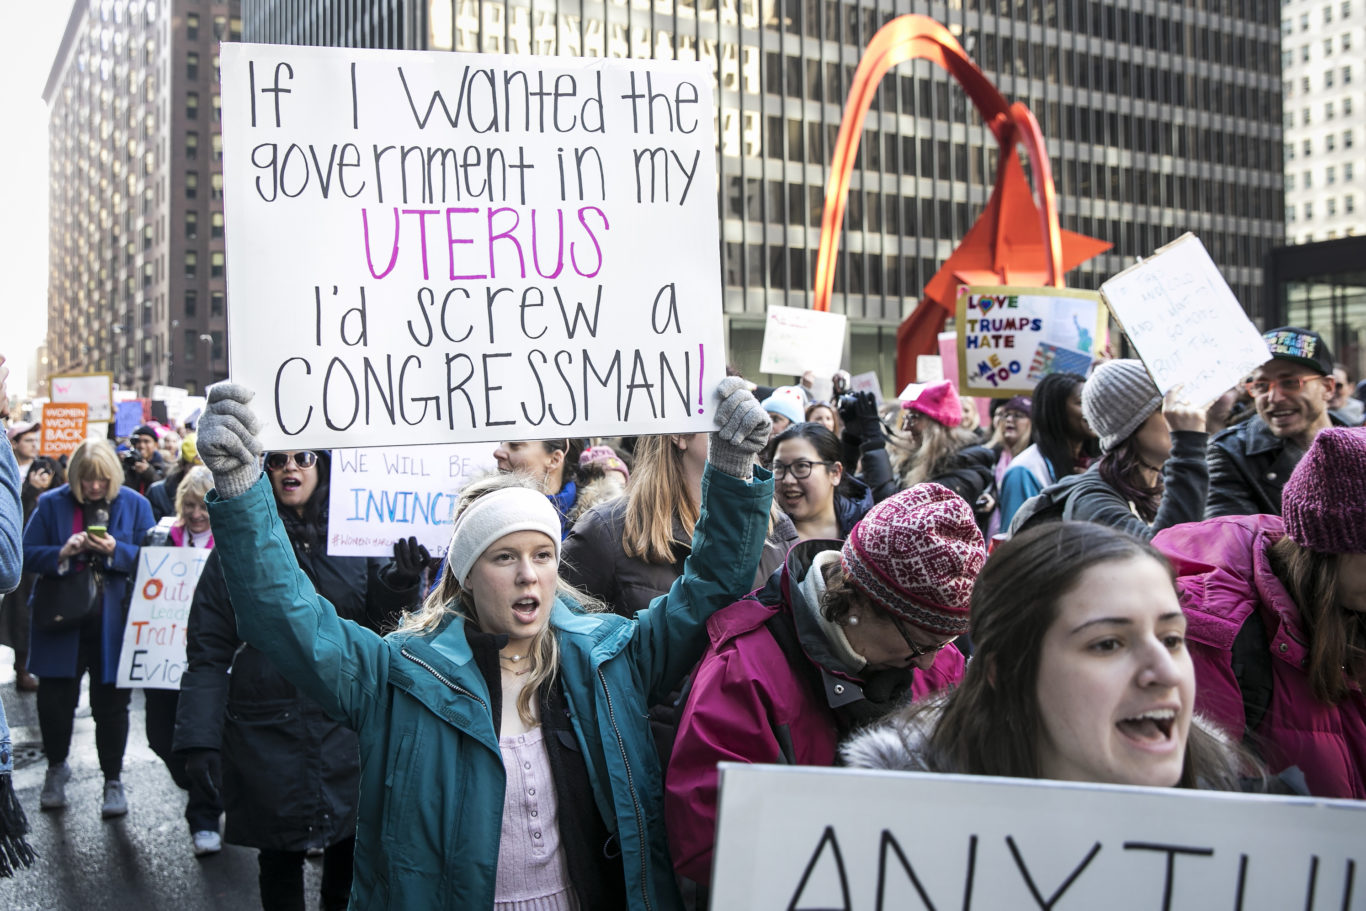 A woman's witty sign in Chicago on Saturday (Ashlee Rezin/AP)